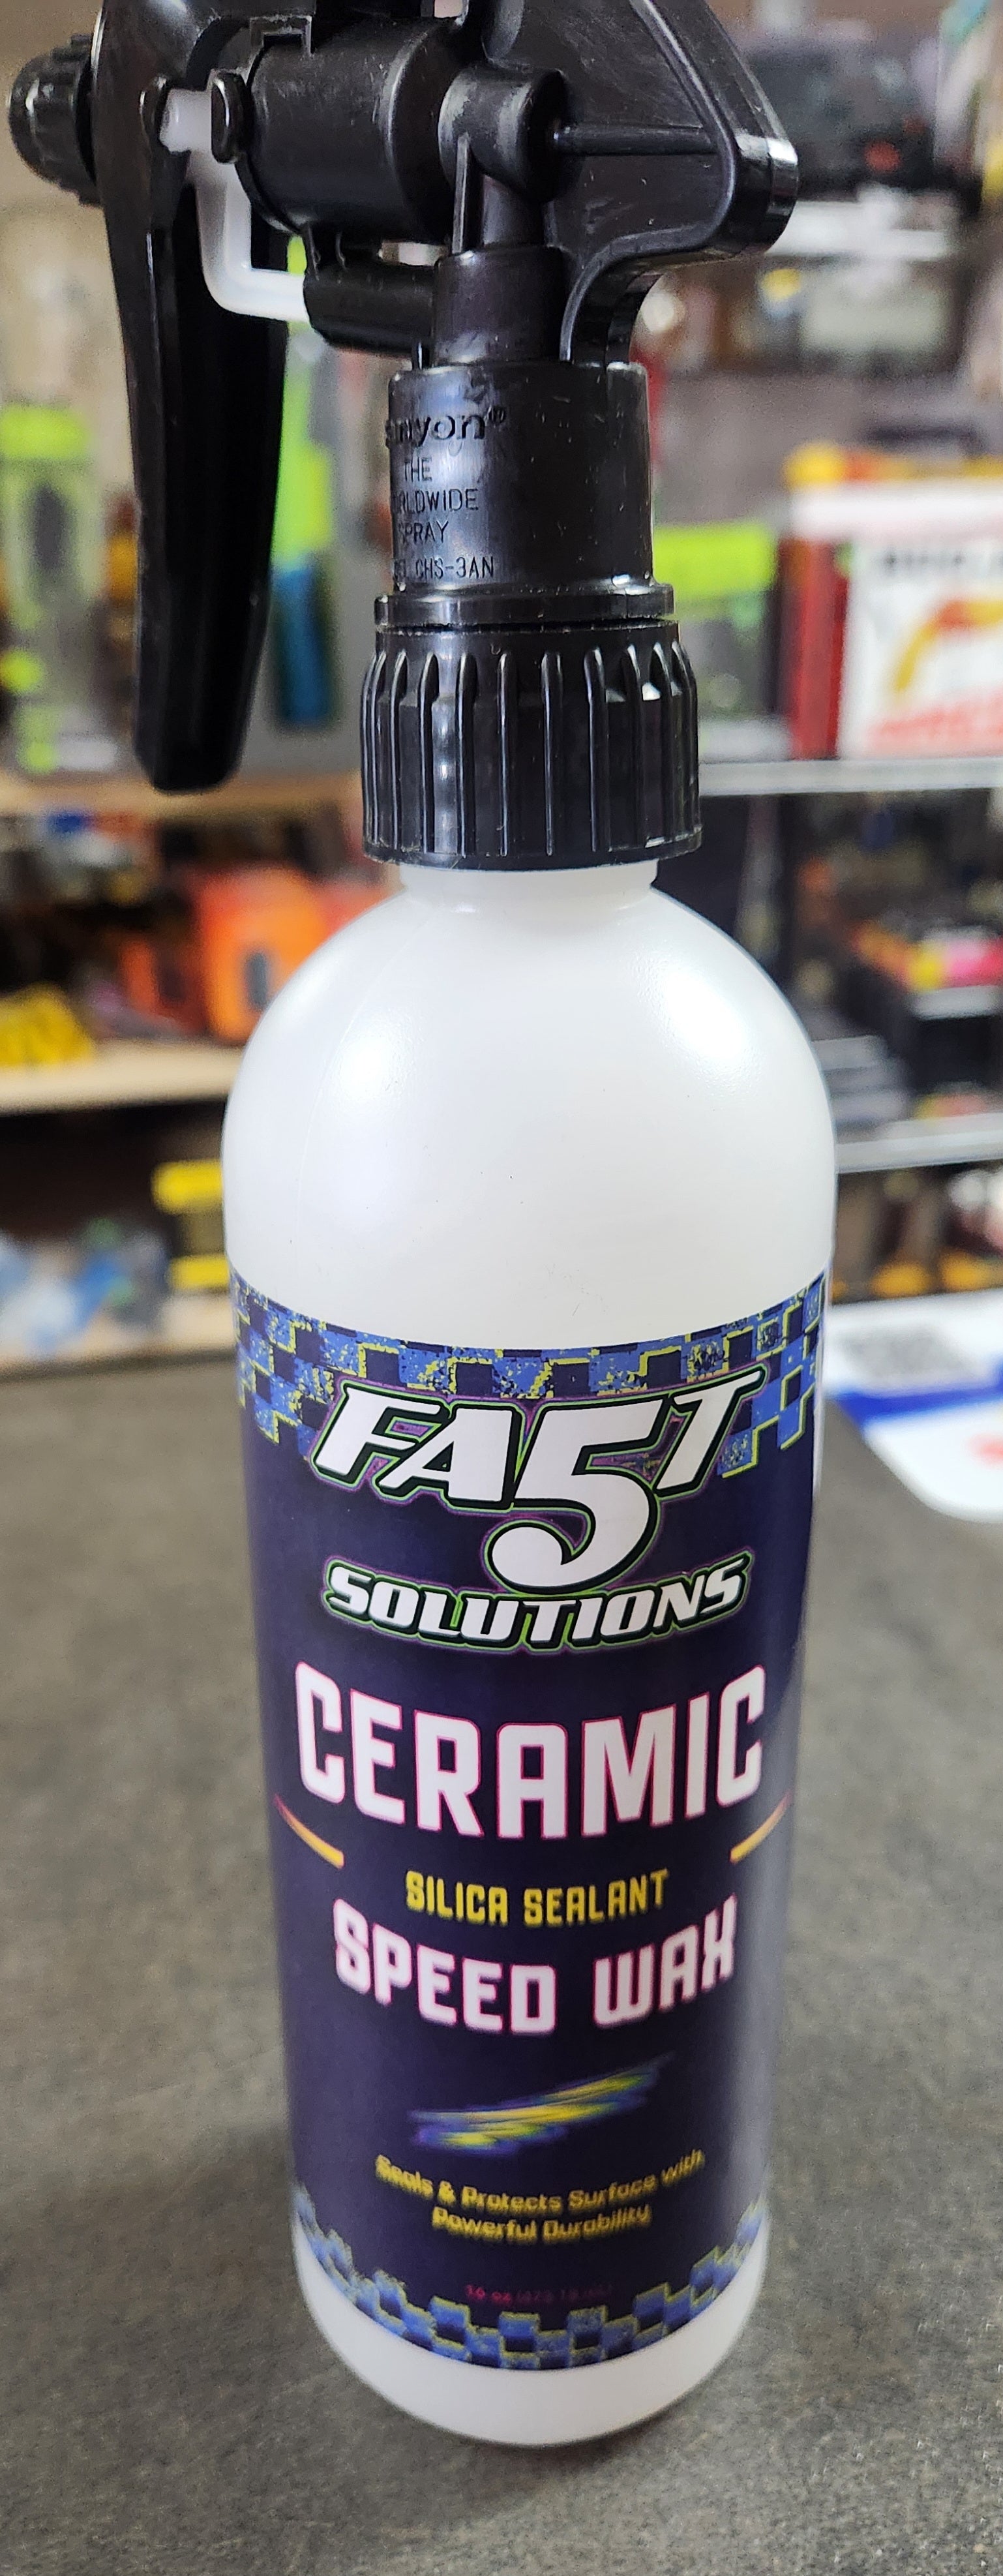 Fast 5 Solutions Ceramic Speed Wax 16oz - The Tool Store